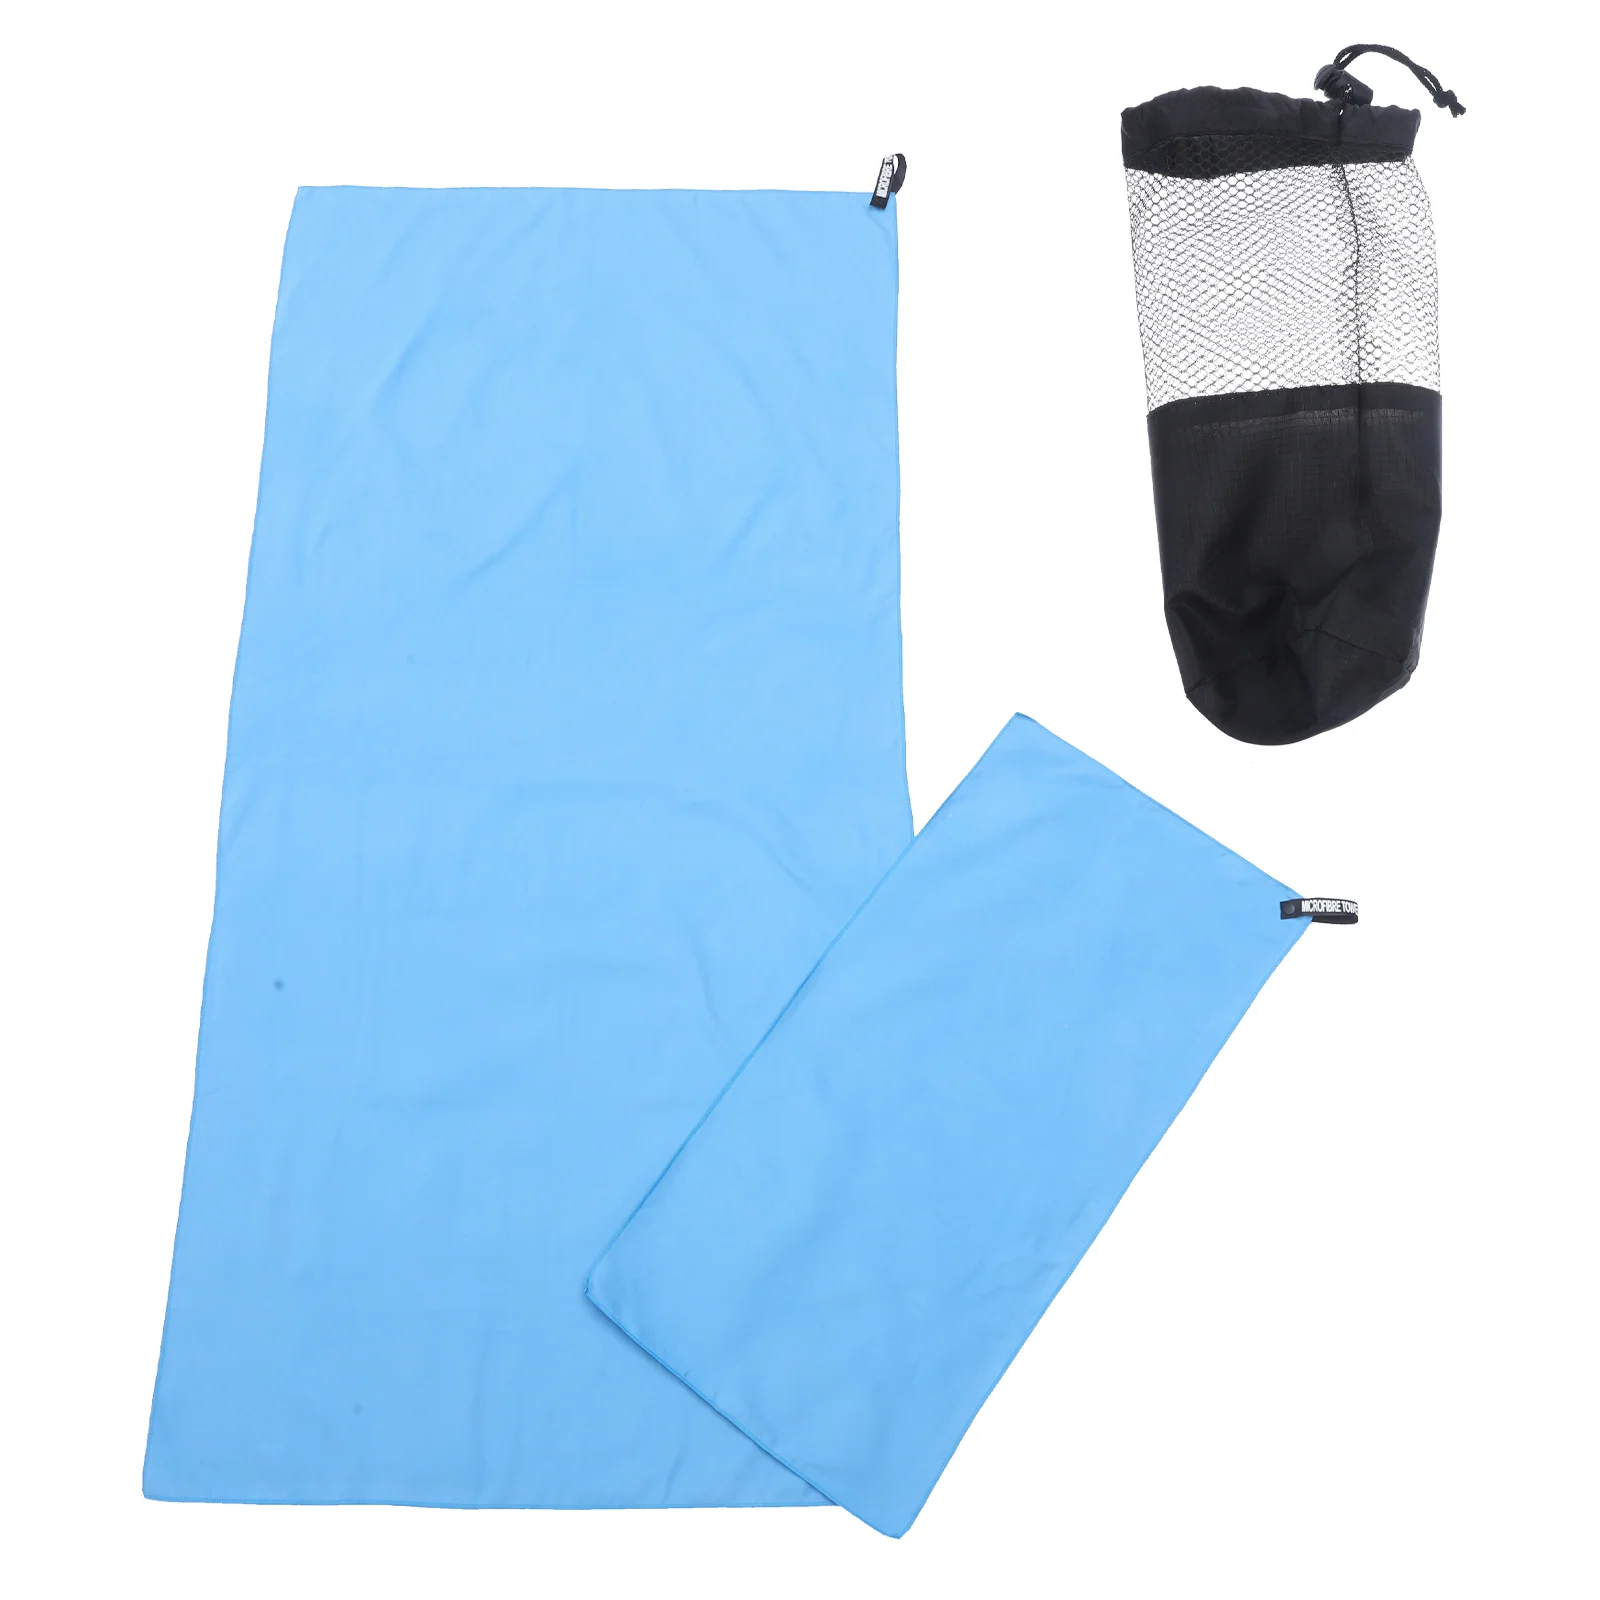 Travel Towel Drying Gym Sports Portable Towel Pocket Towel for Home Shower